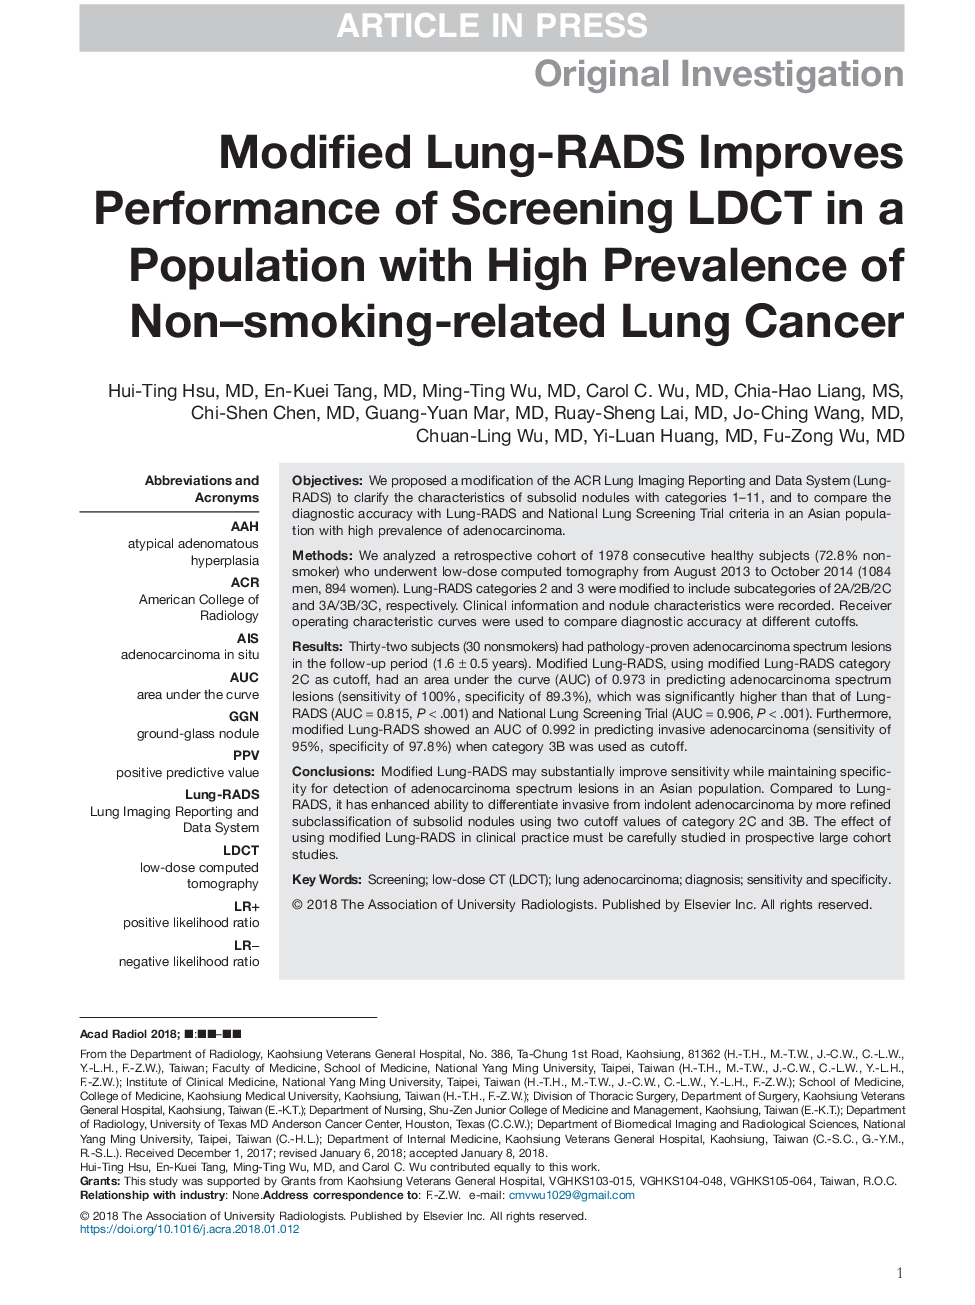 Modified Lung-RADS Improves Performance of Screening LDCT in a Population with High Prevalence of Non-smoking-related Lung Cancer